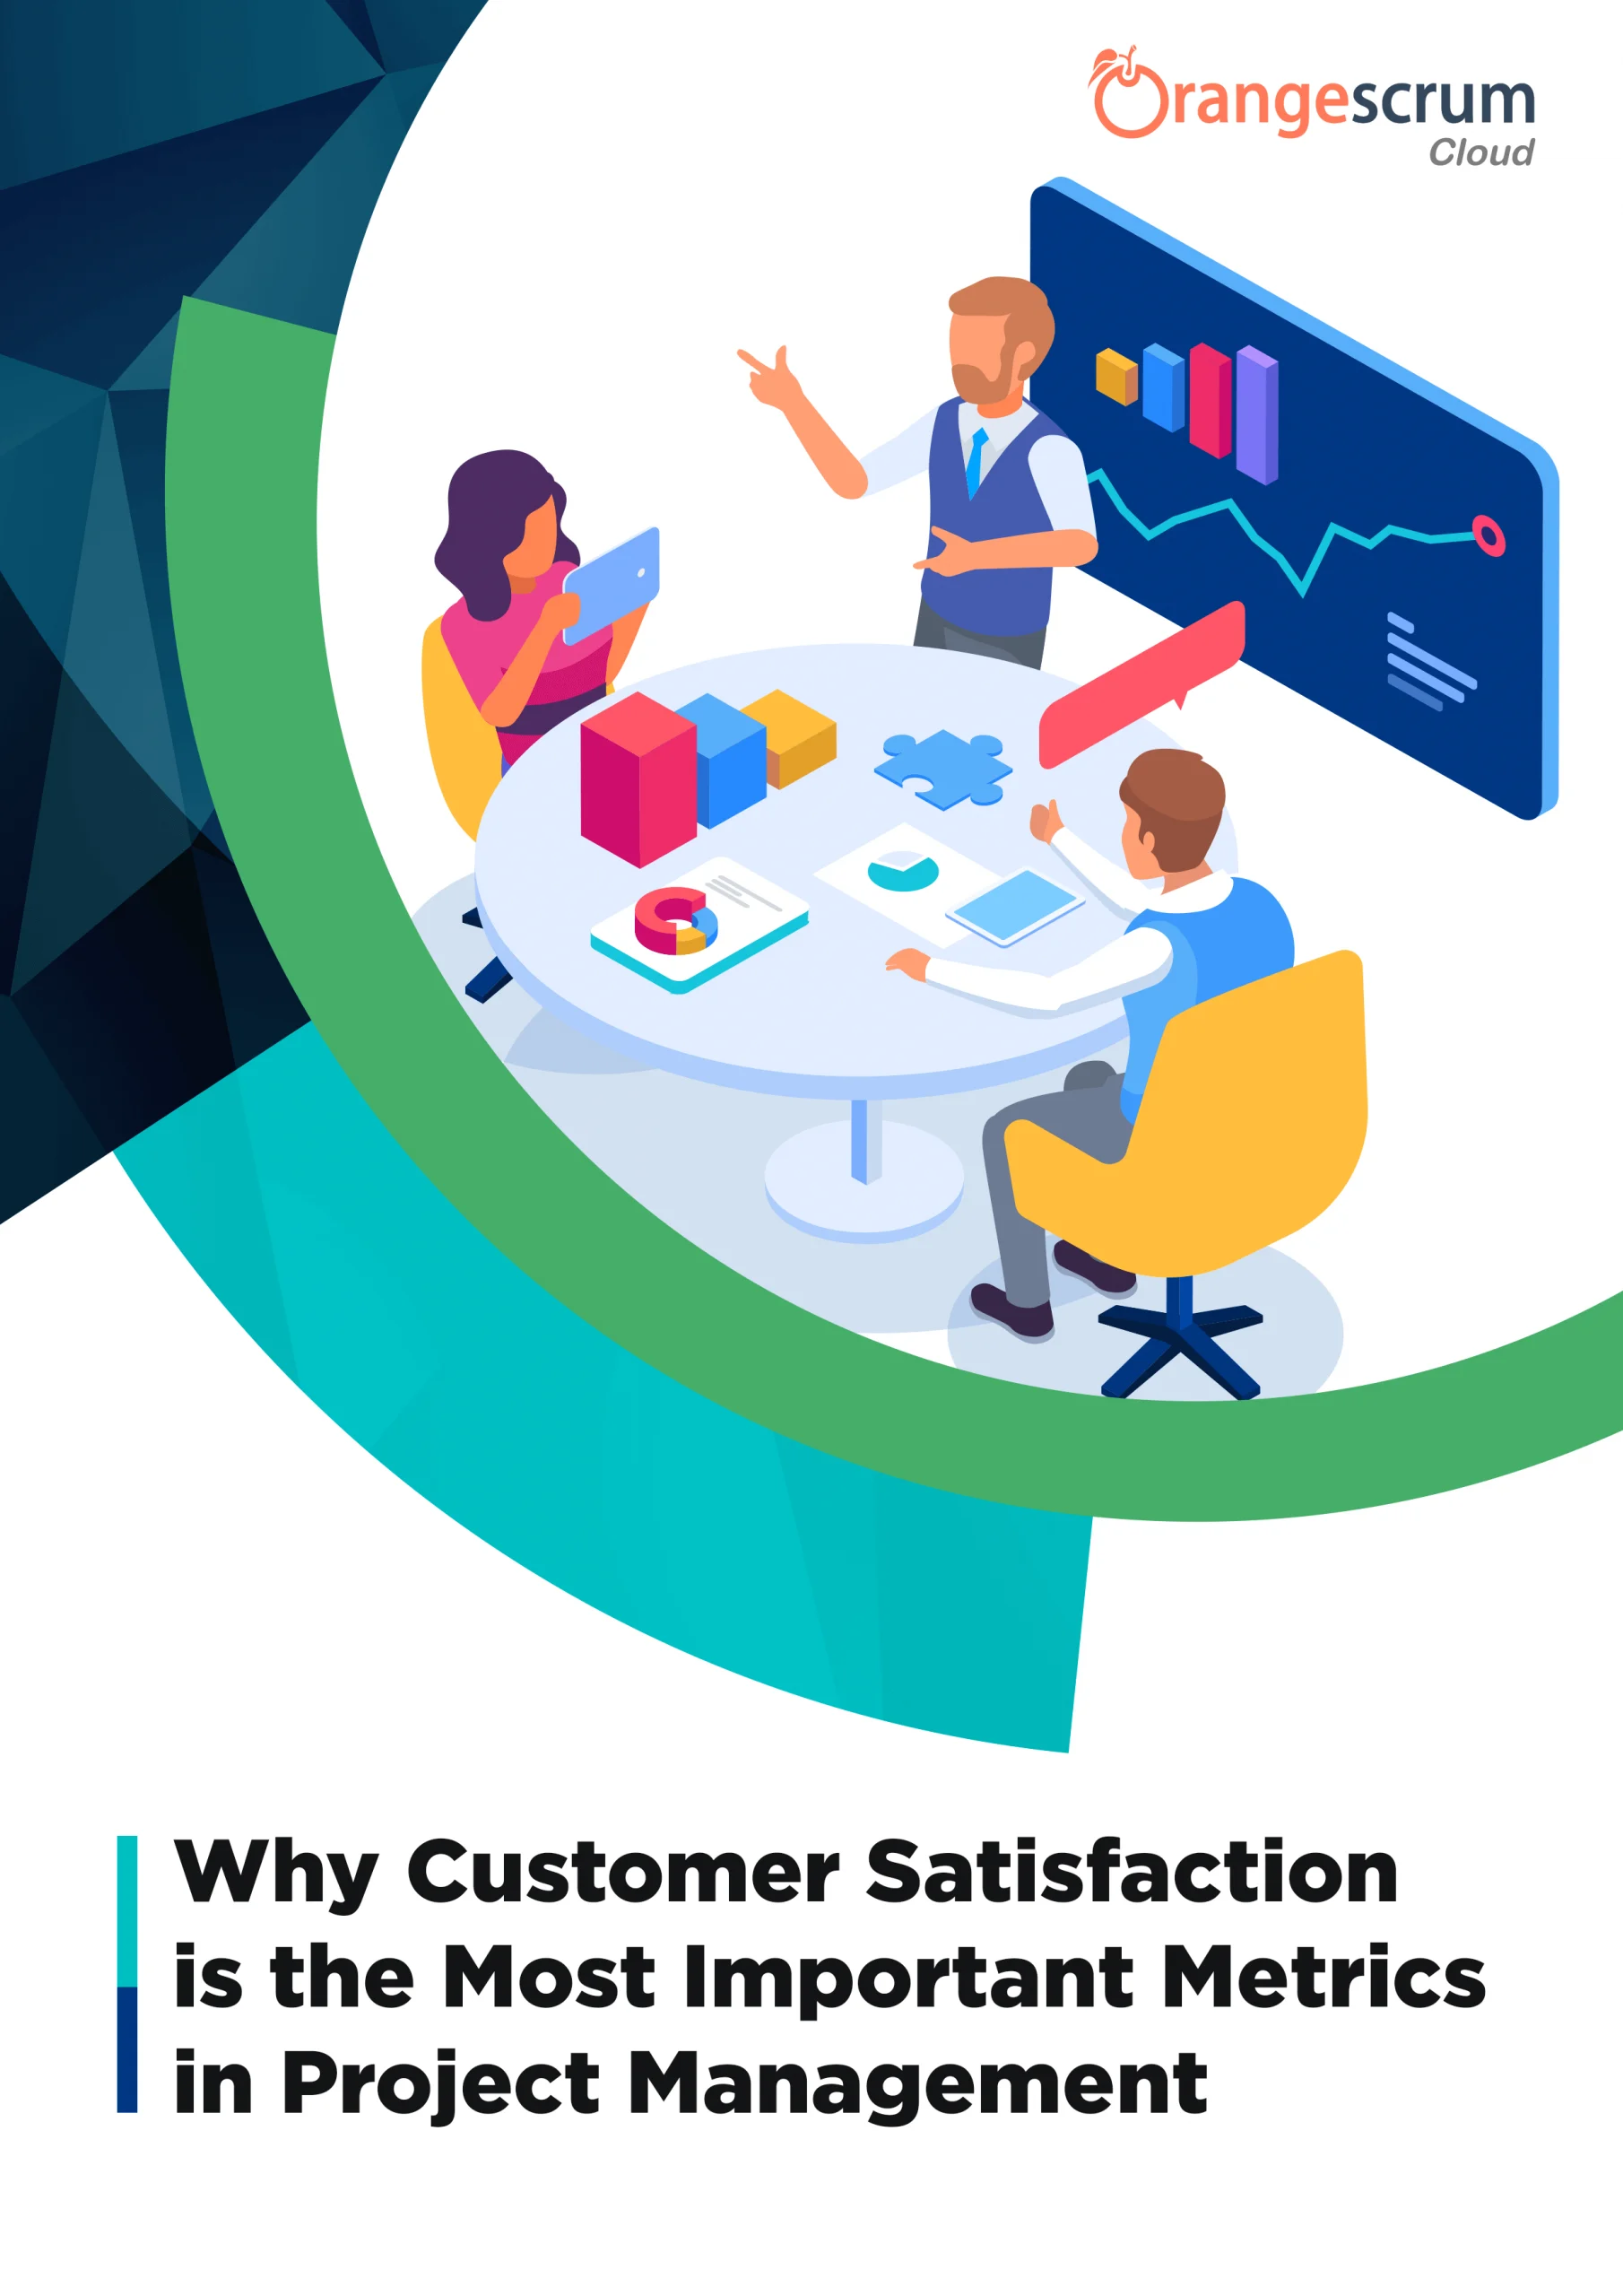 Why Customer Satisfaction is the Most Important Metrics in Project Management